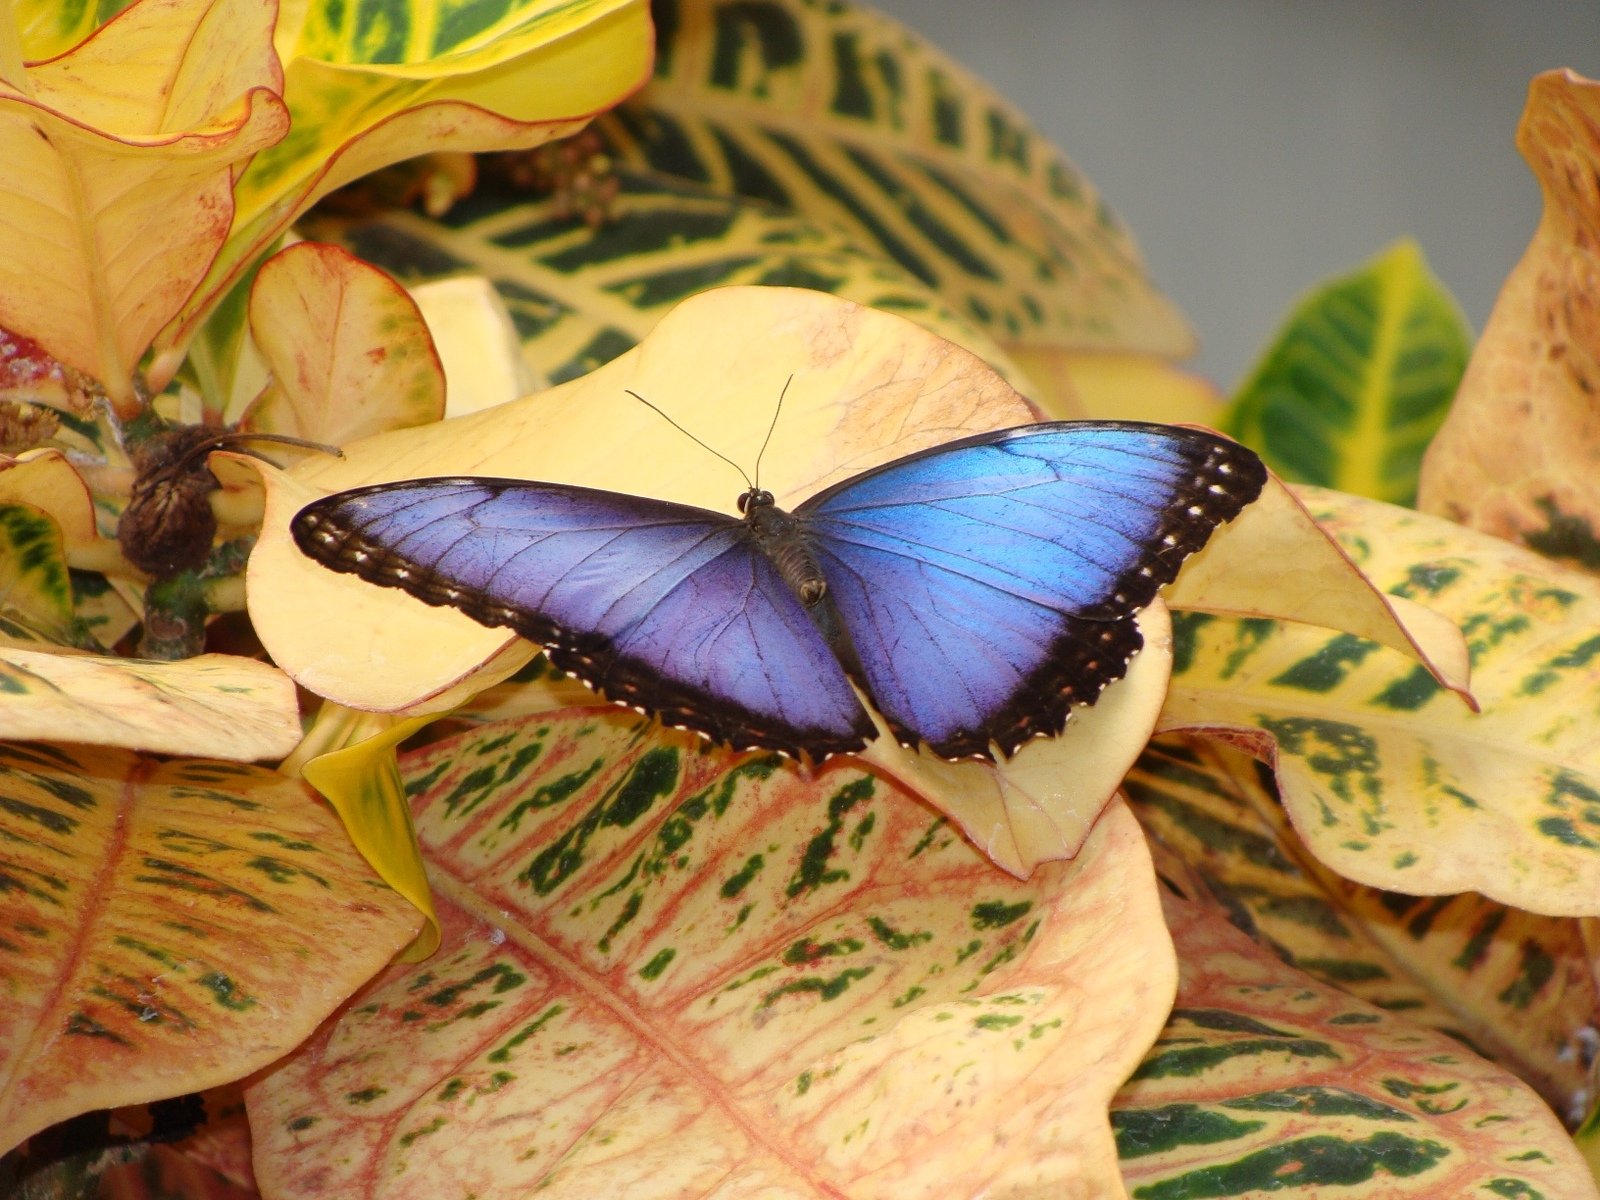 a blue erfly with black spots sitting on some colorful leaves